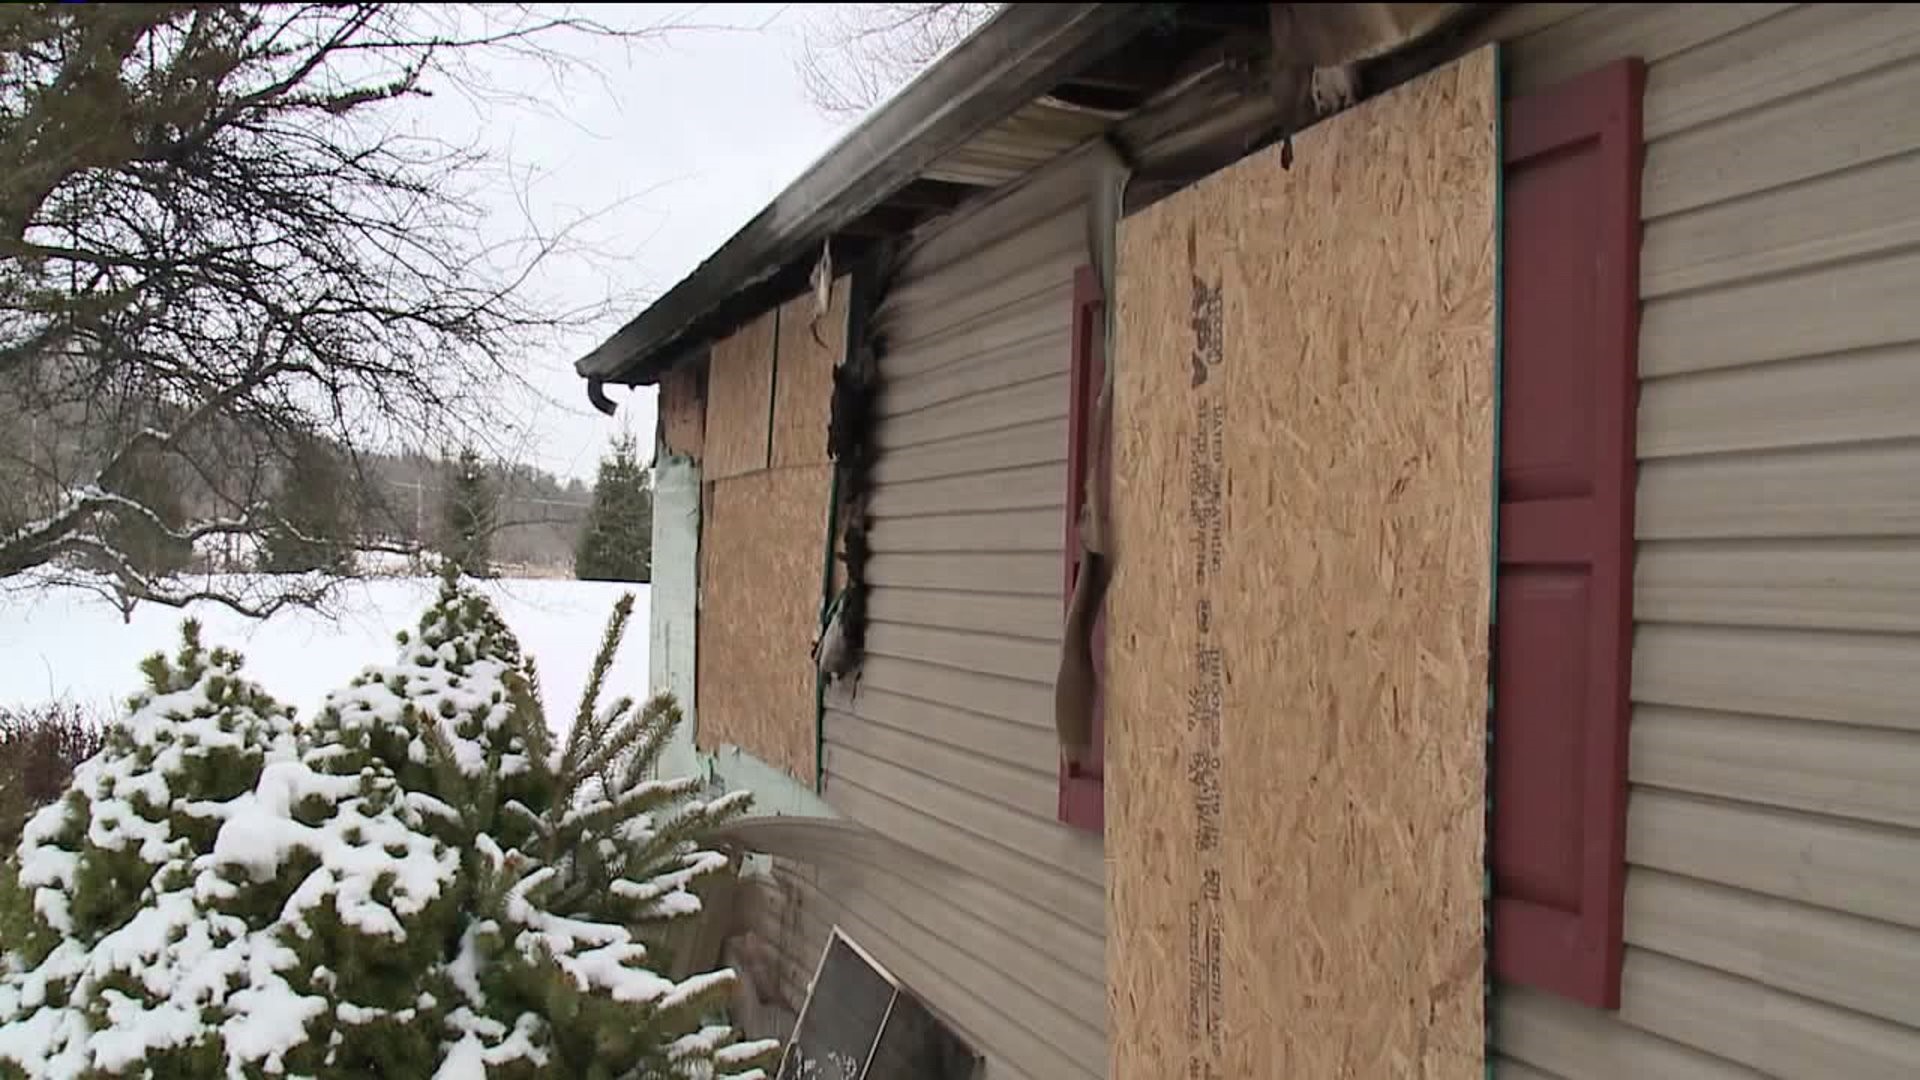 Family Loses Everything in Fire